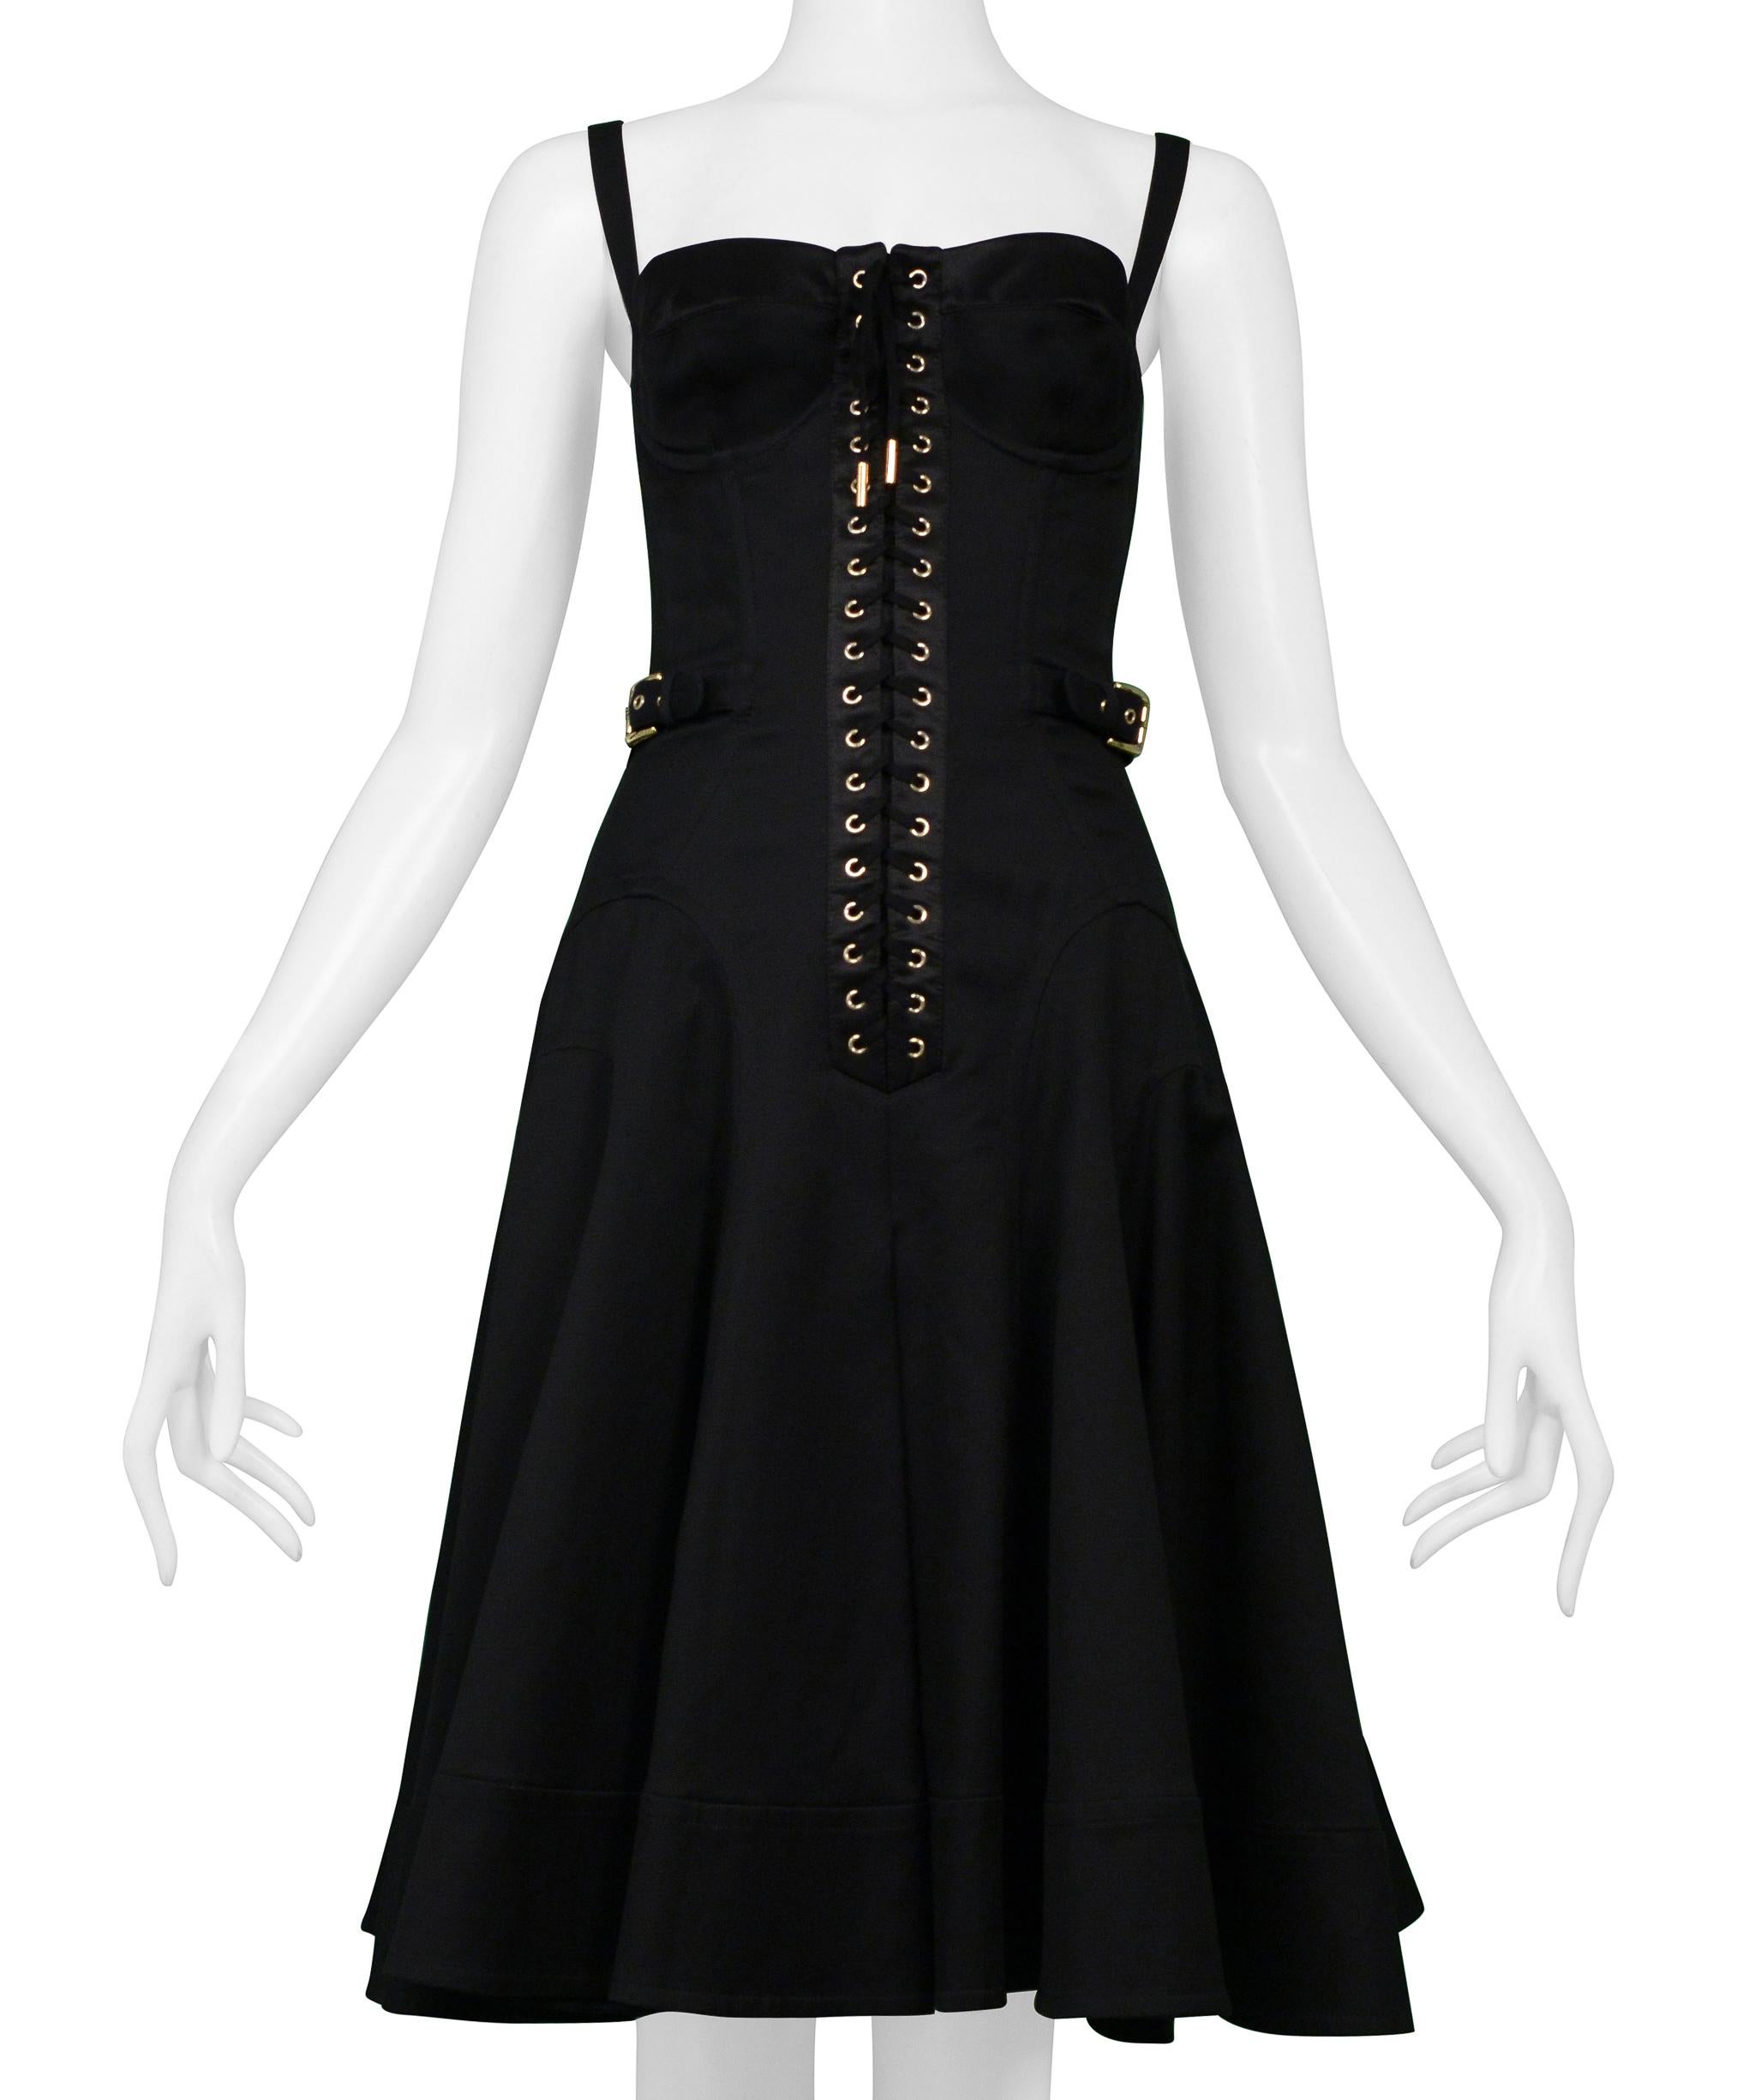 Docle & Gabbana Black Corset Dress With Buckles In Excellent Condition For Sale In Los Angeles, CA